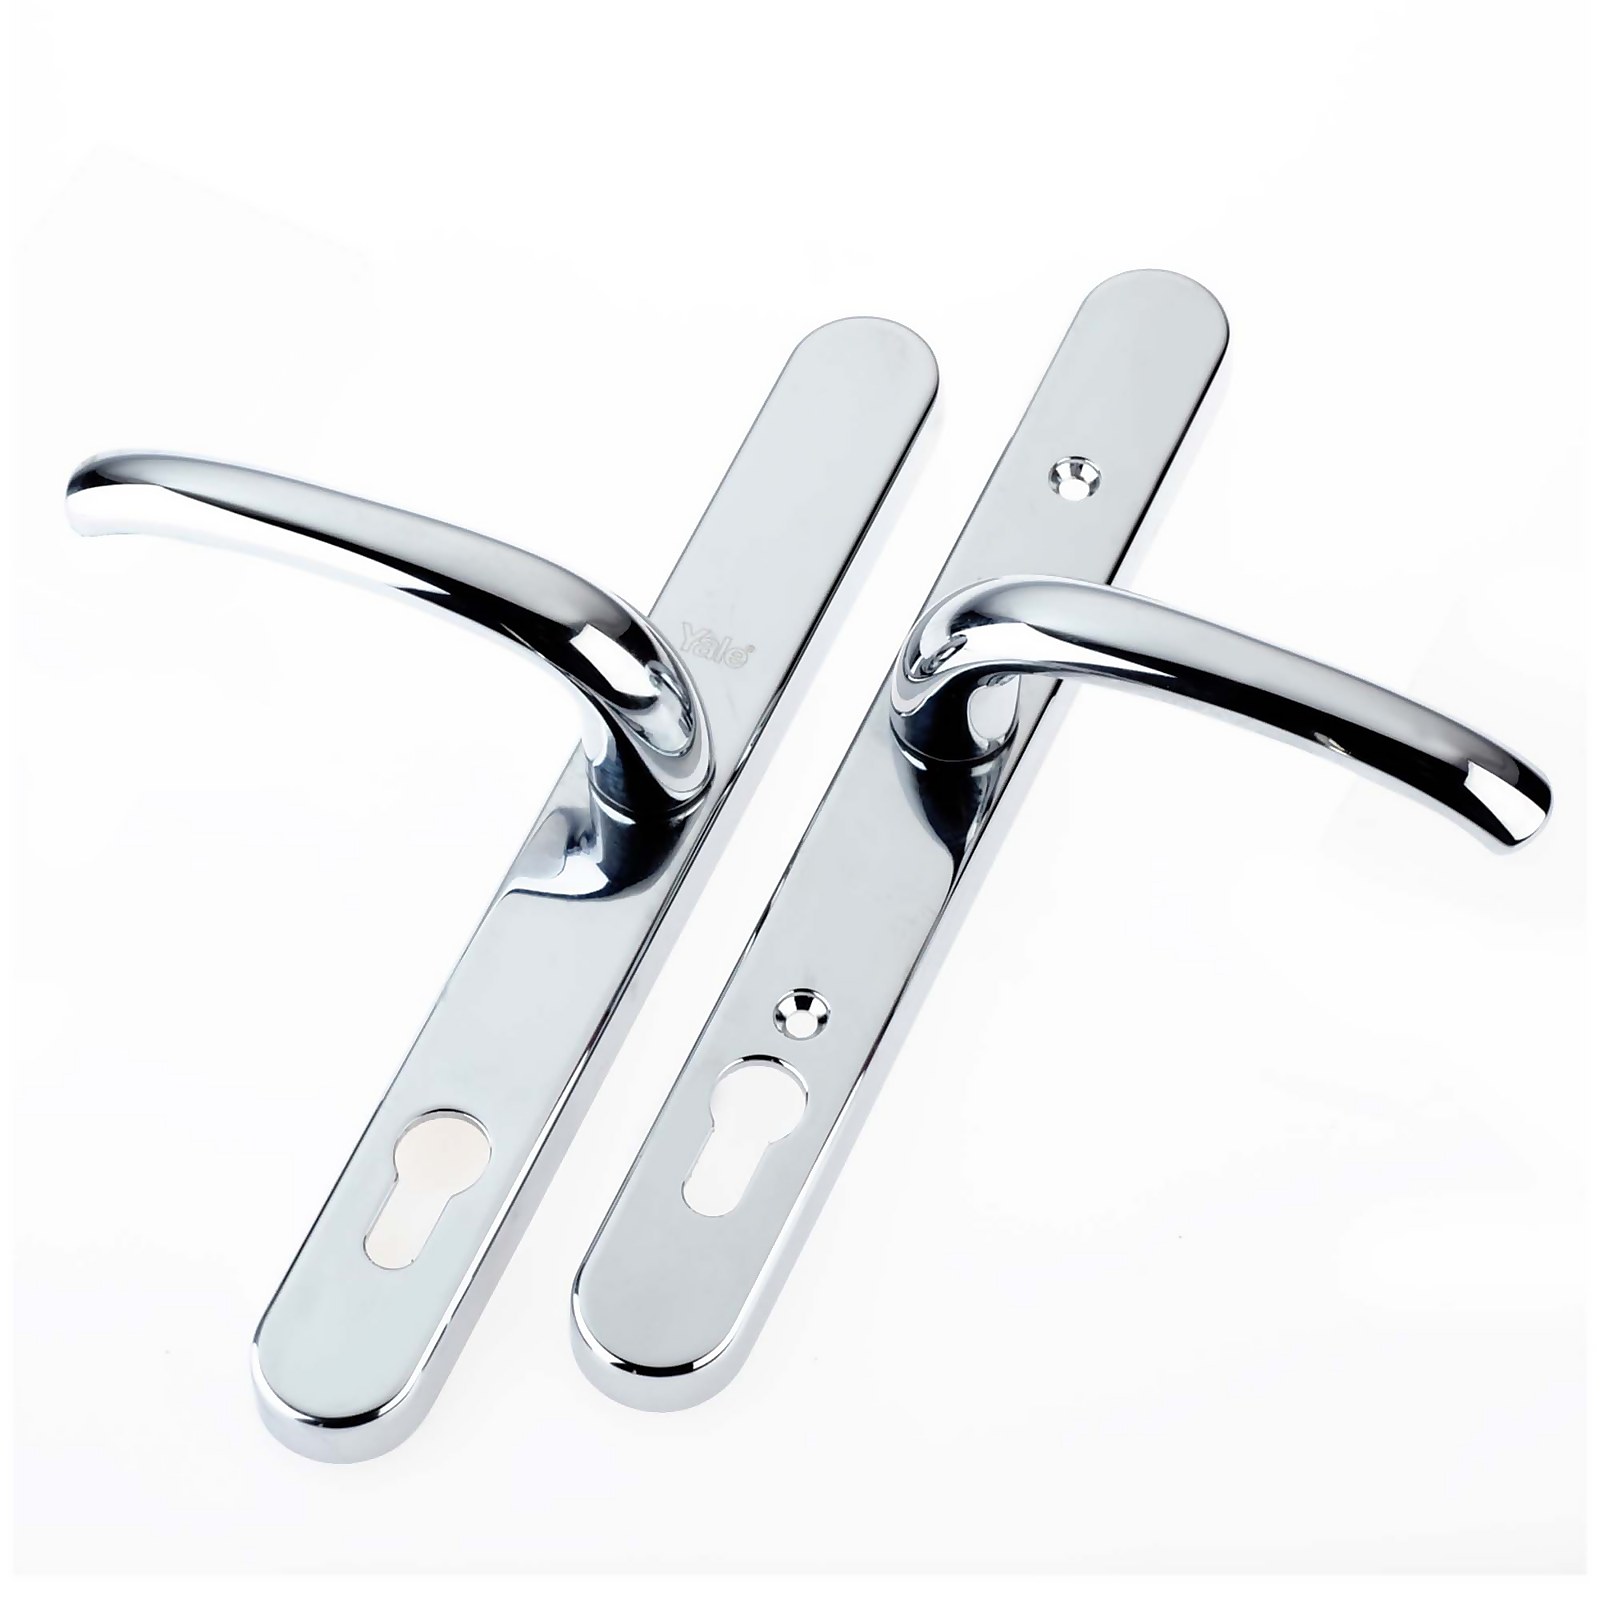 Photo of Yale Pvcu Replacement Door Handle - Chrome